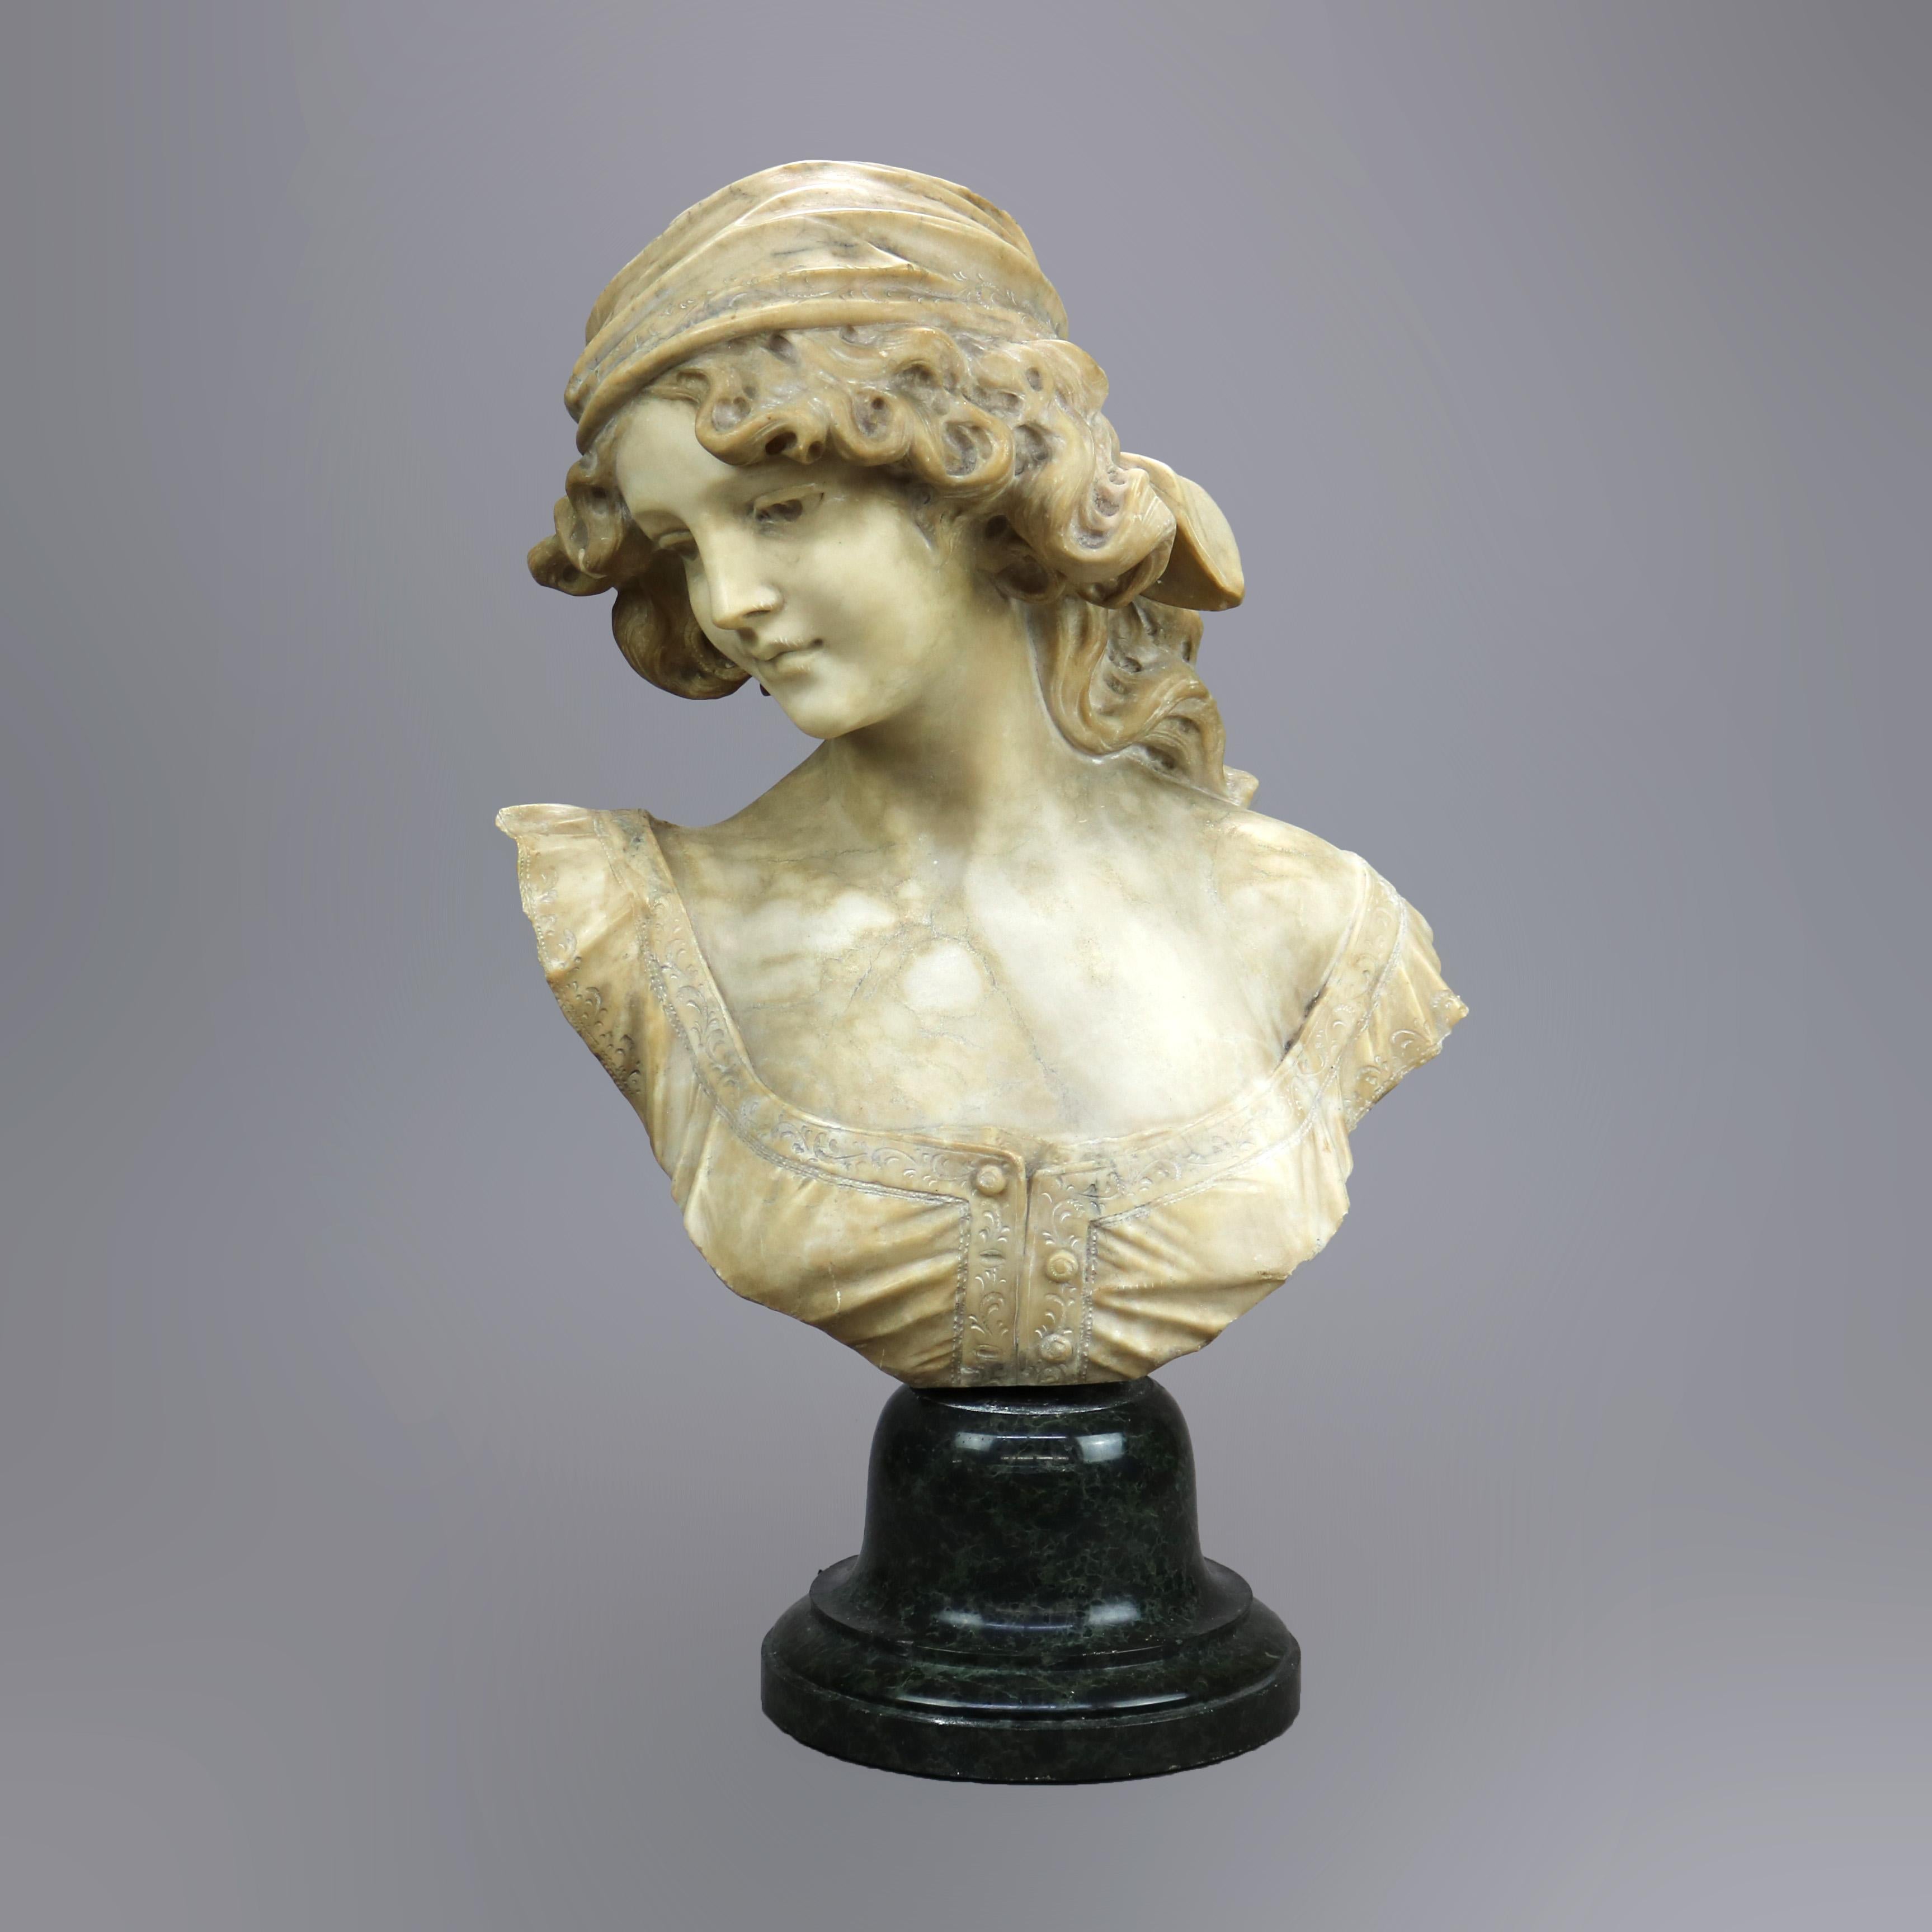 An antique Italian portrait sculpture offers carved marble bust of peasant woman or girl, unsigned, c1890.

Measures - 23'' H X 15'' W X 8'' D.